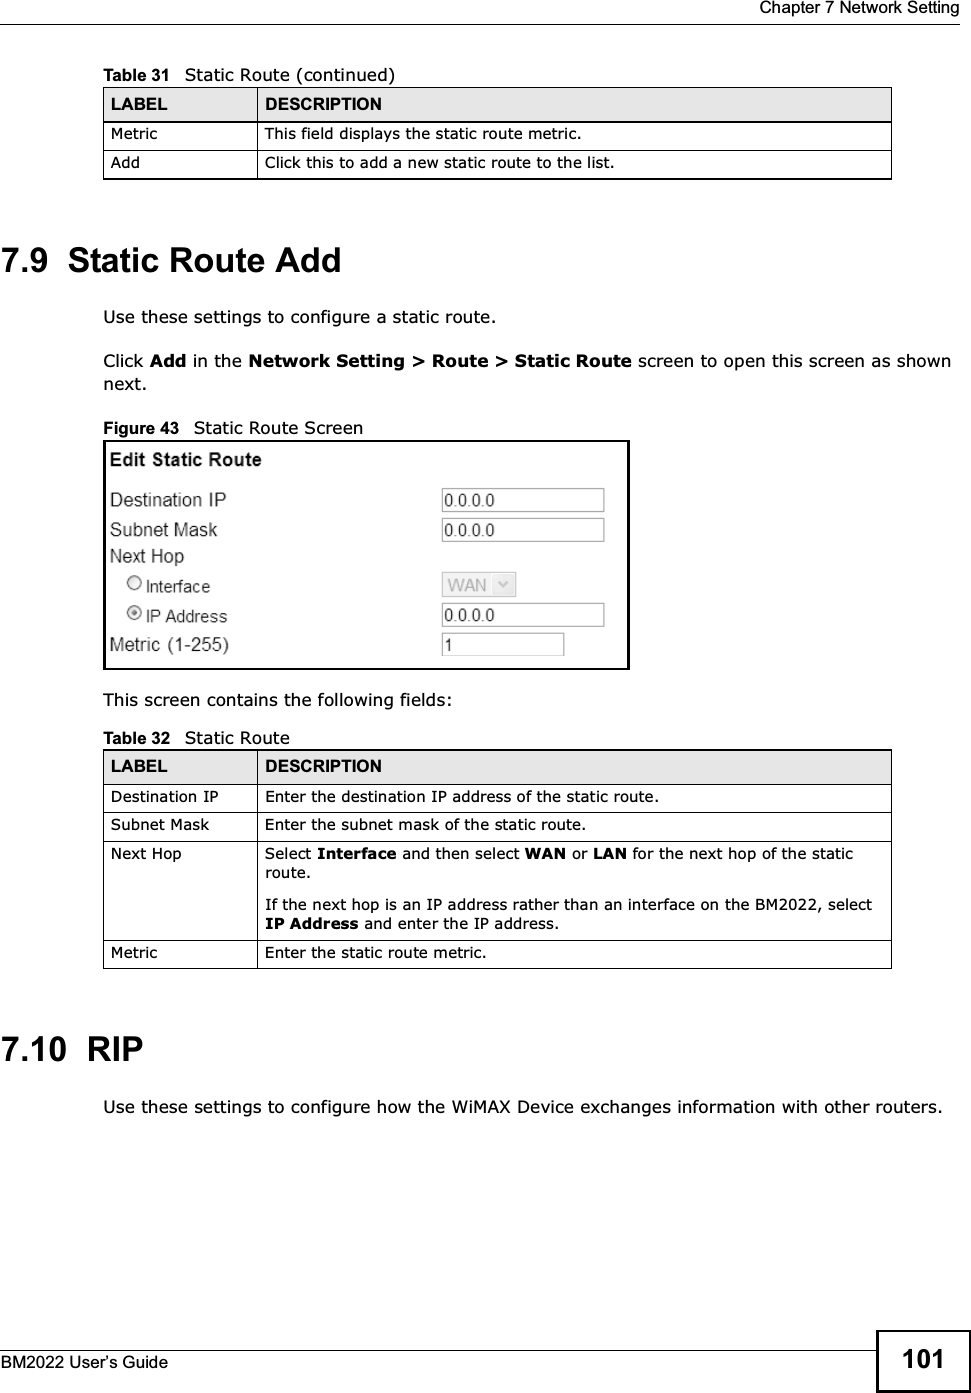  Chapter 7 Network SettingBM2022 Users Guide 1017.9  Static Route AddUse these settings to configure a static route.Click Add in the Network Setting &gt; Route &gt; Static Route screen to open this screen as shown next.Figure 43   Static Route ScreenThis screen contains the following fields:7.10  RIPUse these settings to configure how the WiMAX Device exchanges information with other routers.Metric This field displays the static route metric.Add Click this to add a new static route to the list.Table 31   Static Route (continued)LABEL DESCRIPTIONTable 32   Static RouteLABEL DESCRIPTIONDestination IP Enter the destination IP address of the static route.Subnet Mask Enter the subnet mask of the static route.Next Hop Select Interface and then select WAN or LAN for the next hop of the static route.If the next hop is an IP address rather than an interface on the BM2022, select IP Address and enter the IP address.Metric Enter the static route metric.